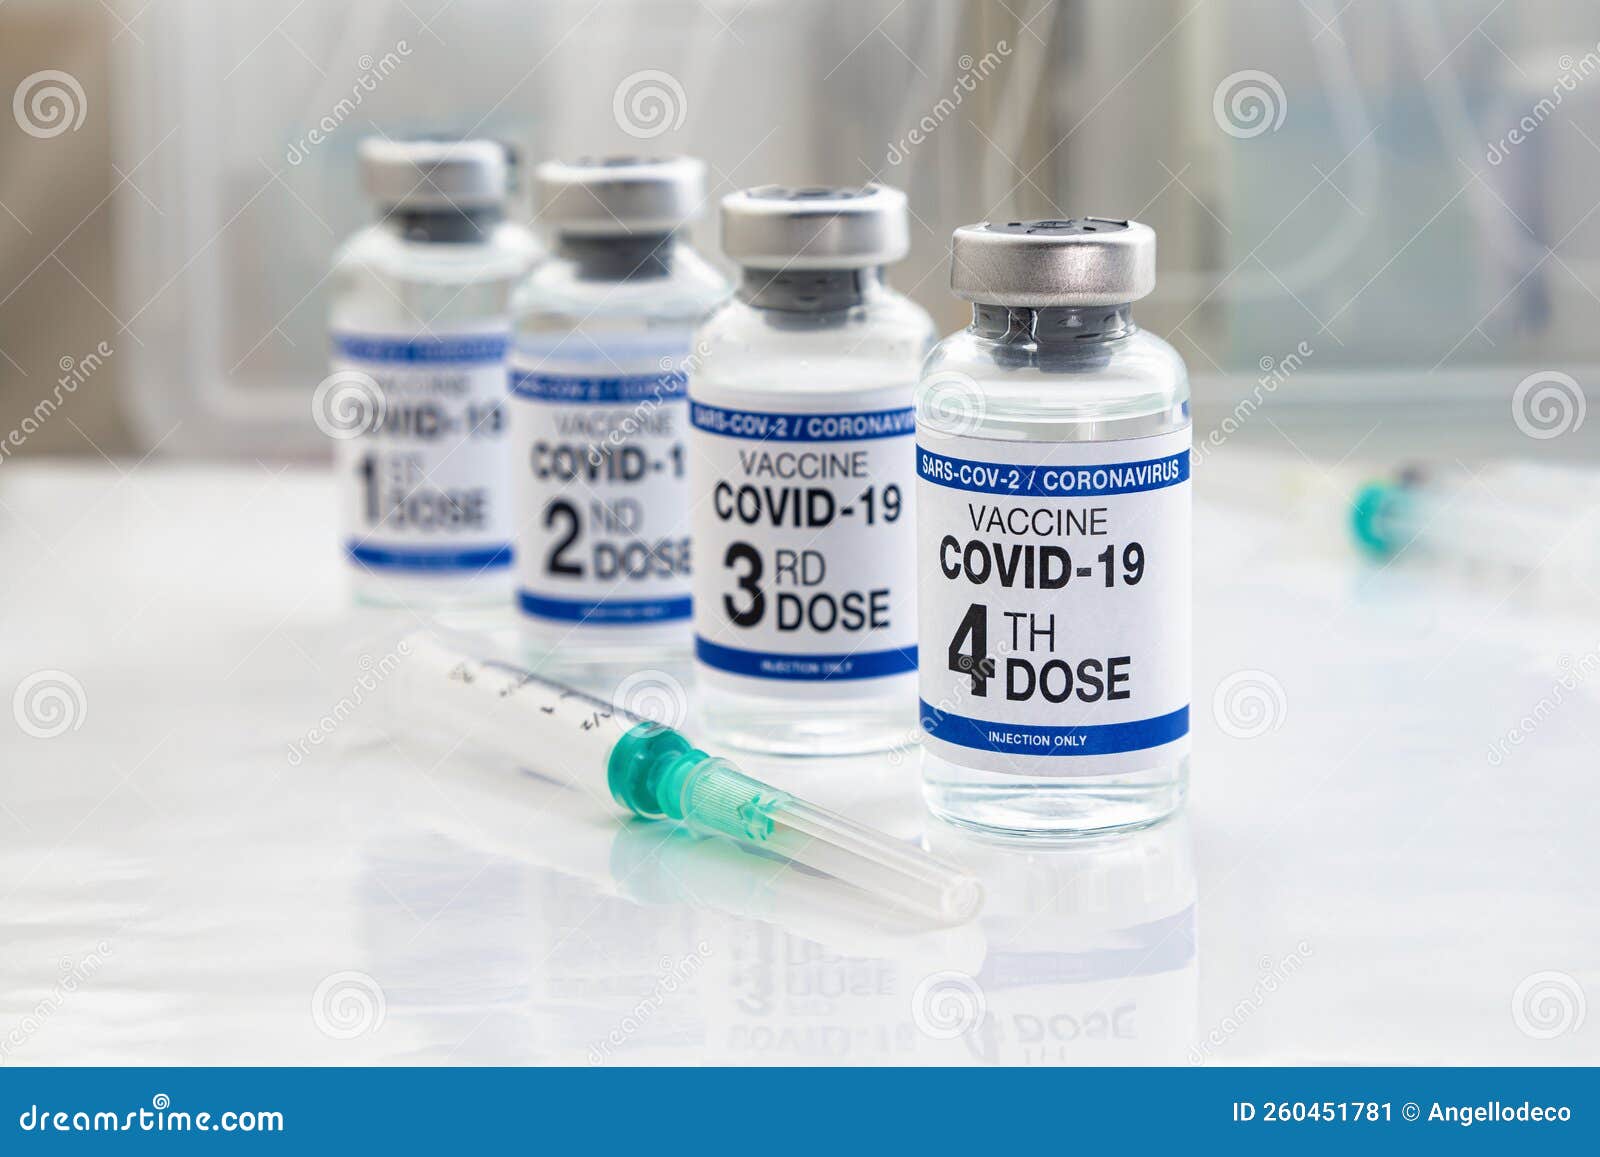 covid-19 vaccine vials for vaccination labeled with 1st, 2nd, 3rd and 4th doses for booster shot against omicron variants